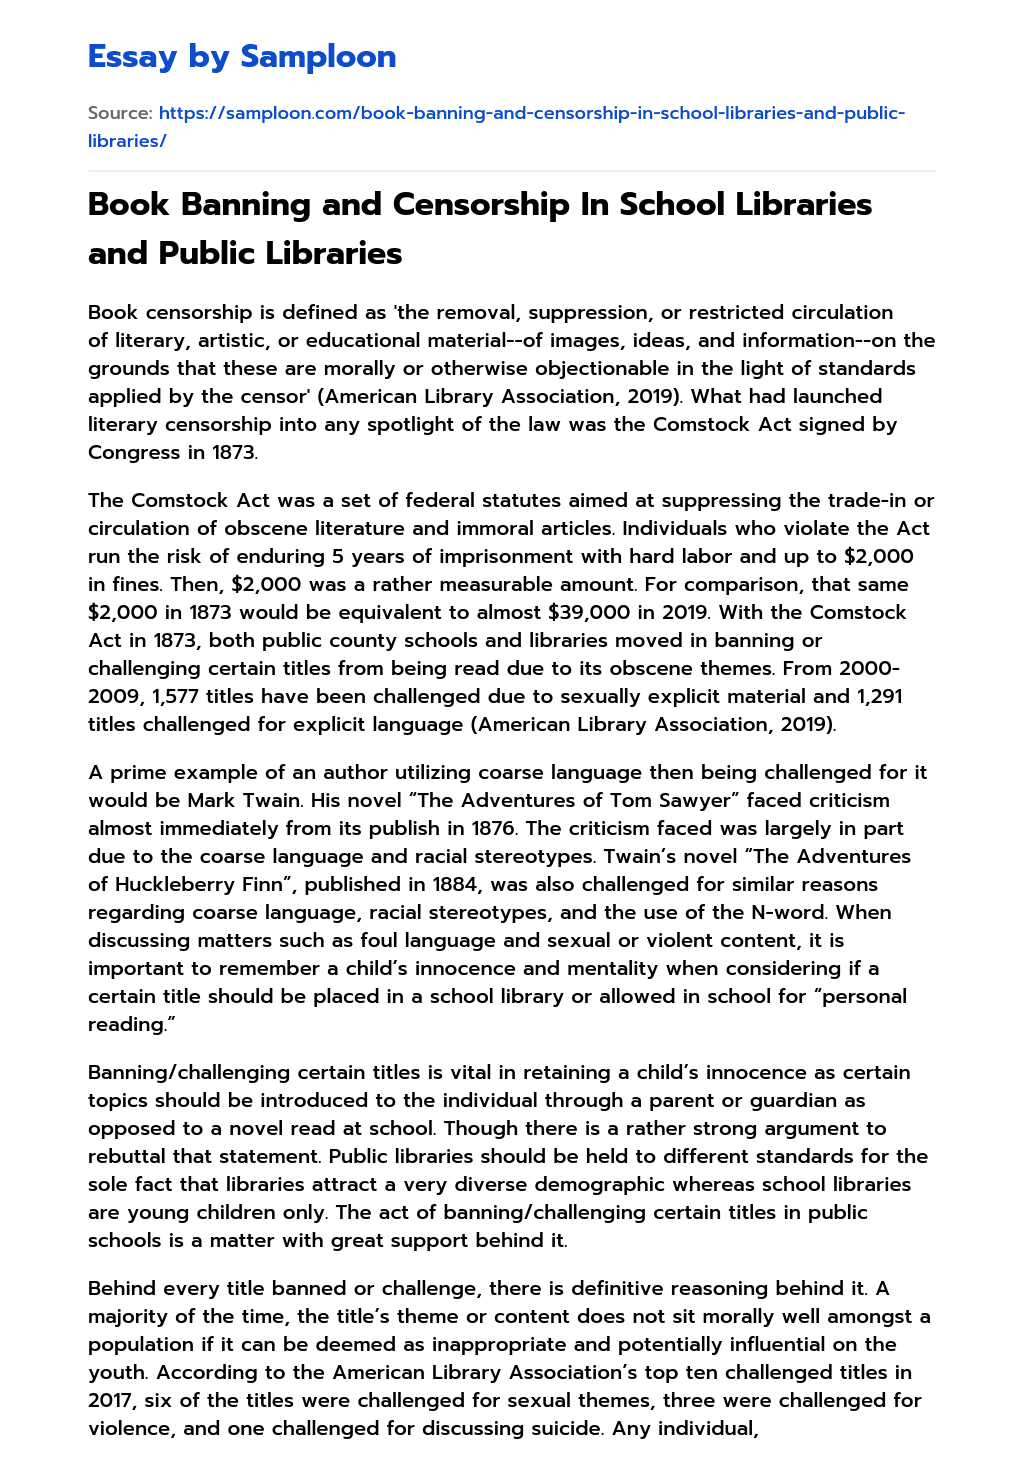 censorship in libraries essay